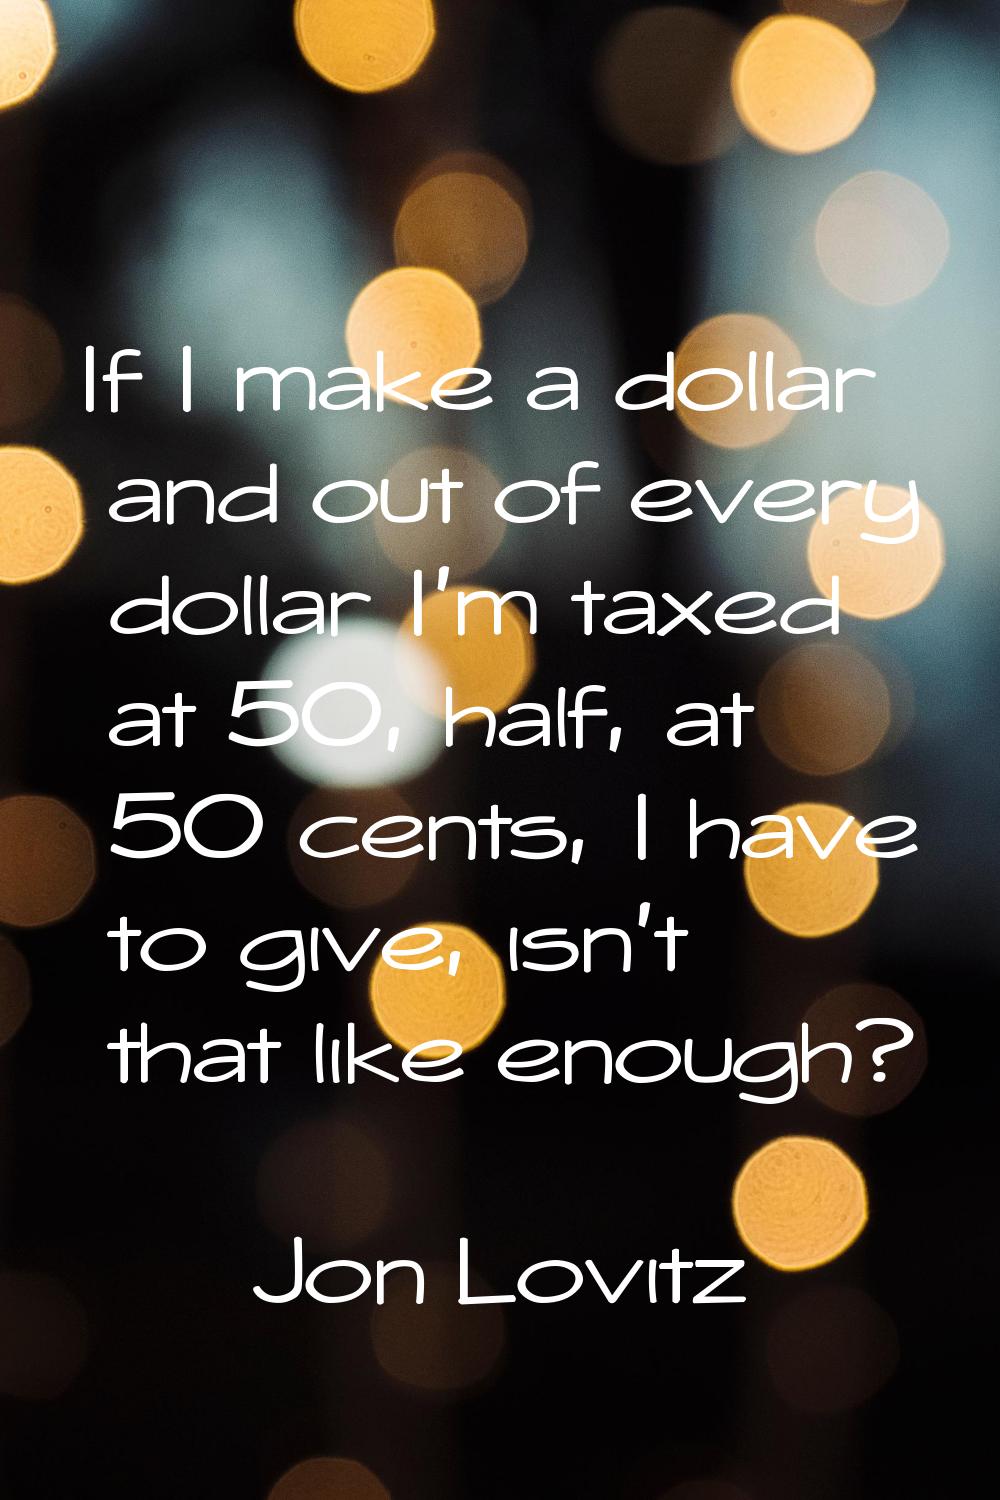 If I make a dollar and out of every dollar I'm taxed at 50, half, at 50 cents, I have to give, isn'